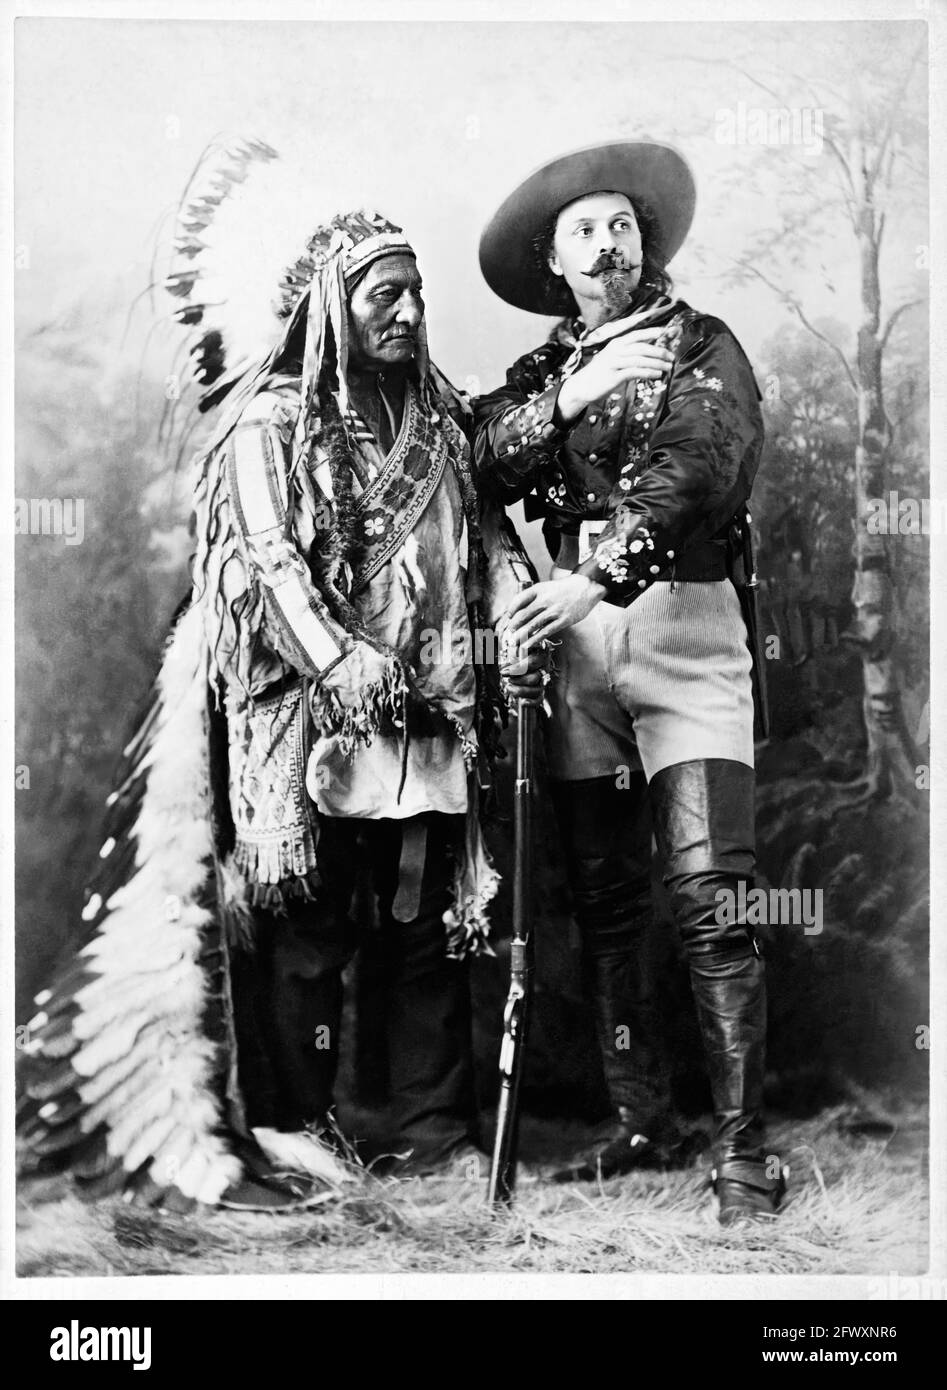 1880 ca , Montreal , CANADA : The celebrated Colonel William Frederick CODY , know as BUFFALO BILL ( 1846 - 1917 ) with Chef SITTING BULL ( 1831 - 1890 ) of Sioux Hunkpapa at  time of WILD WEST SHOW . Photo by W.M. Notman & Son , Montreal . - Epopea del Selvaggio WEST - cowboy - cow-boy  -  Circus - uomo anziano vecchio - older man  - baffi - barba - beard - moustache - Circo - hat - cappello - piume - feathers - Indians of America - Indiani d'America - Native Americans - Nativi americani - Pellerossa - Redskins - fucile - rifle - gun - arma - boots - stivali --- Archivio GBB Stock Photo